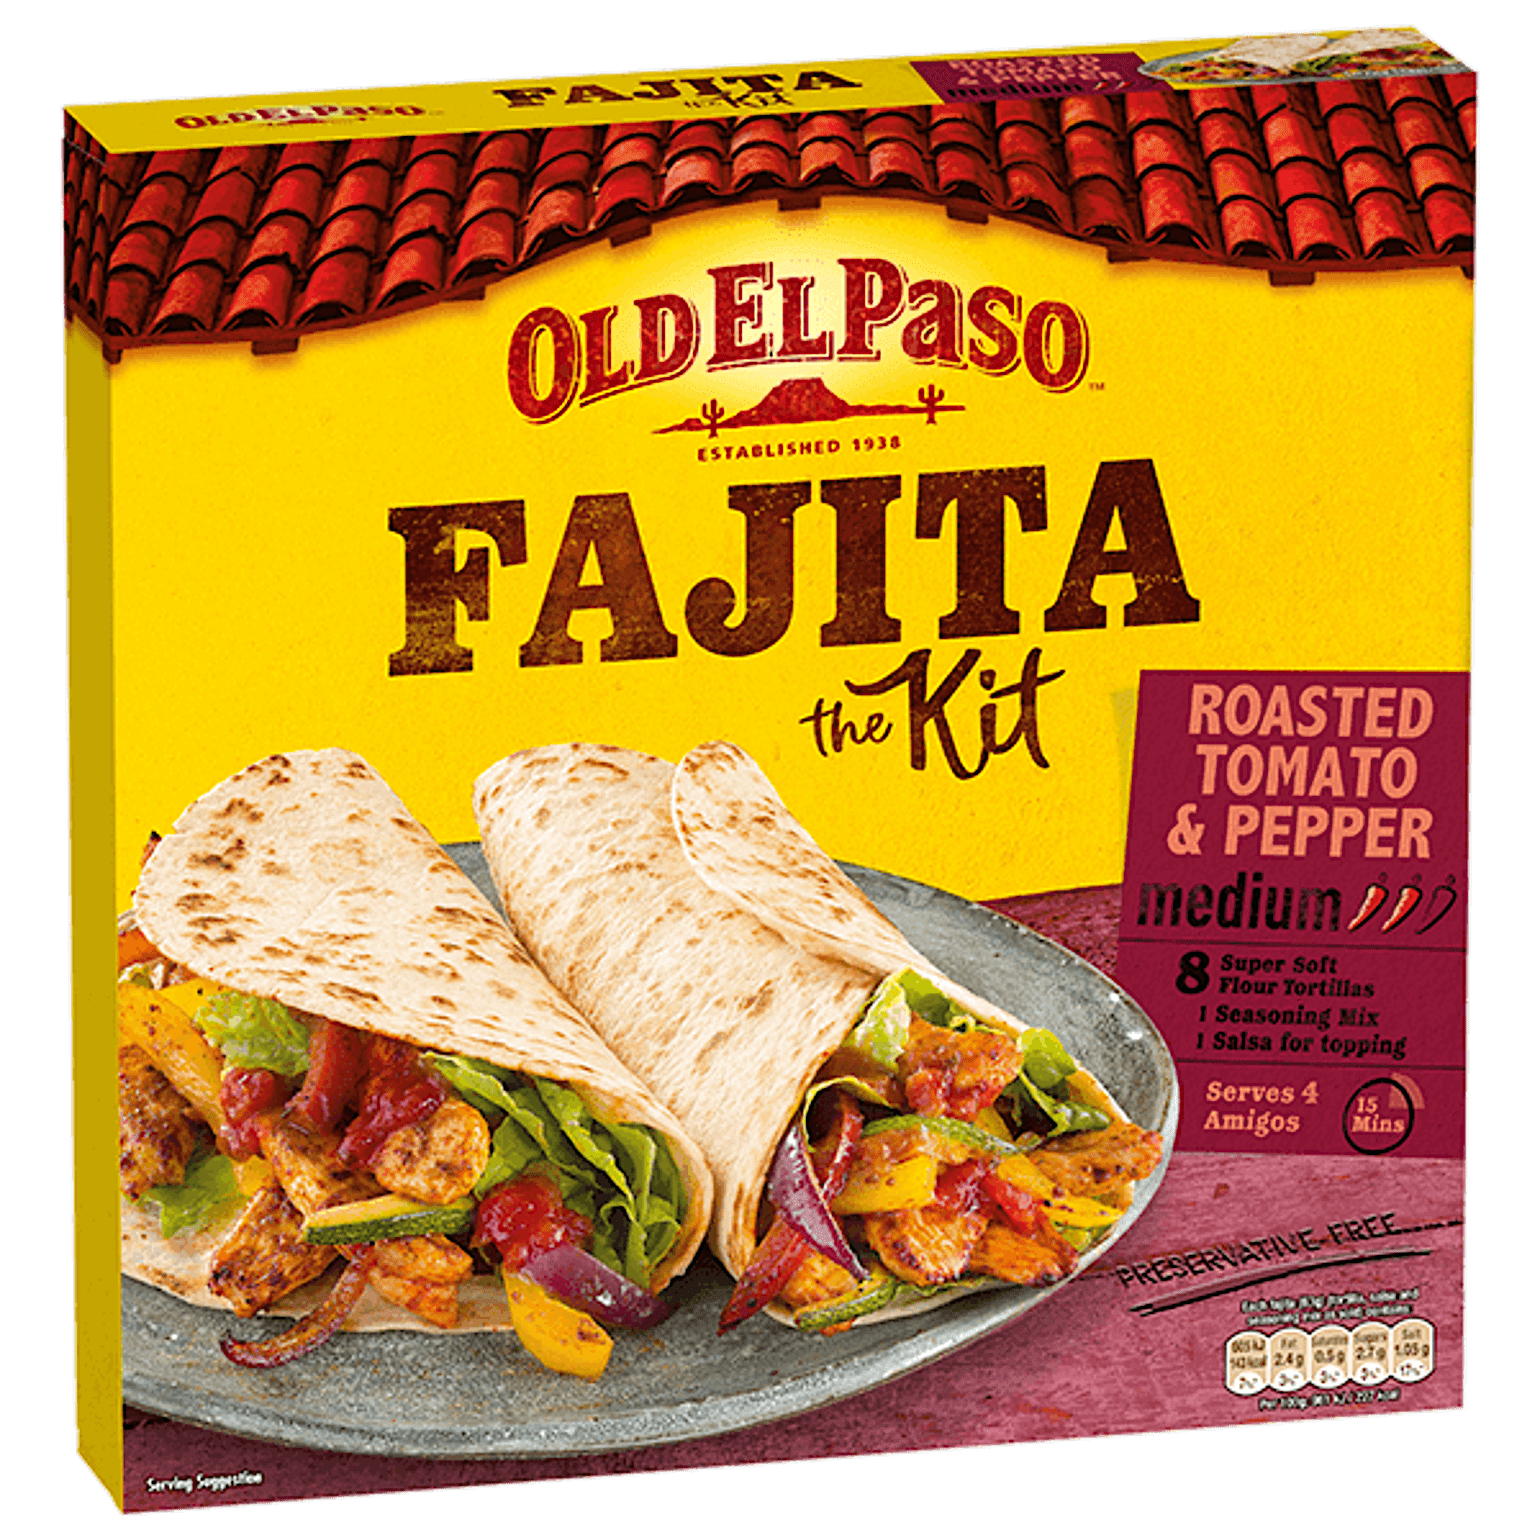 pack of Old El Paso's roasted tomato and pepper fajita kit containing tortillas, spice mix and salsa (500g)